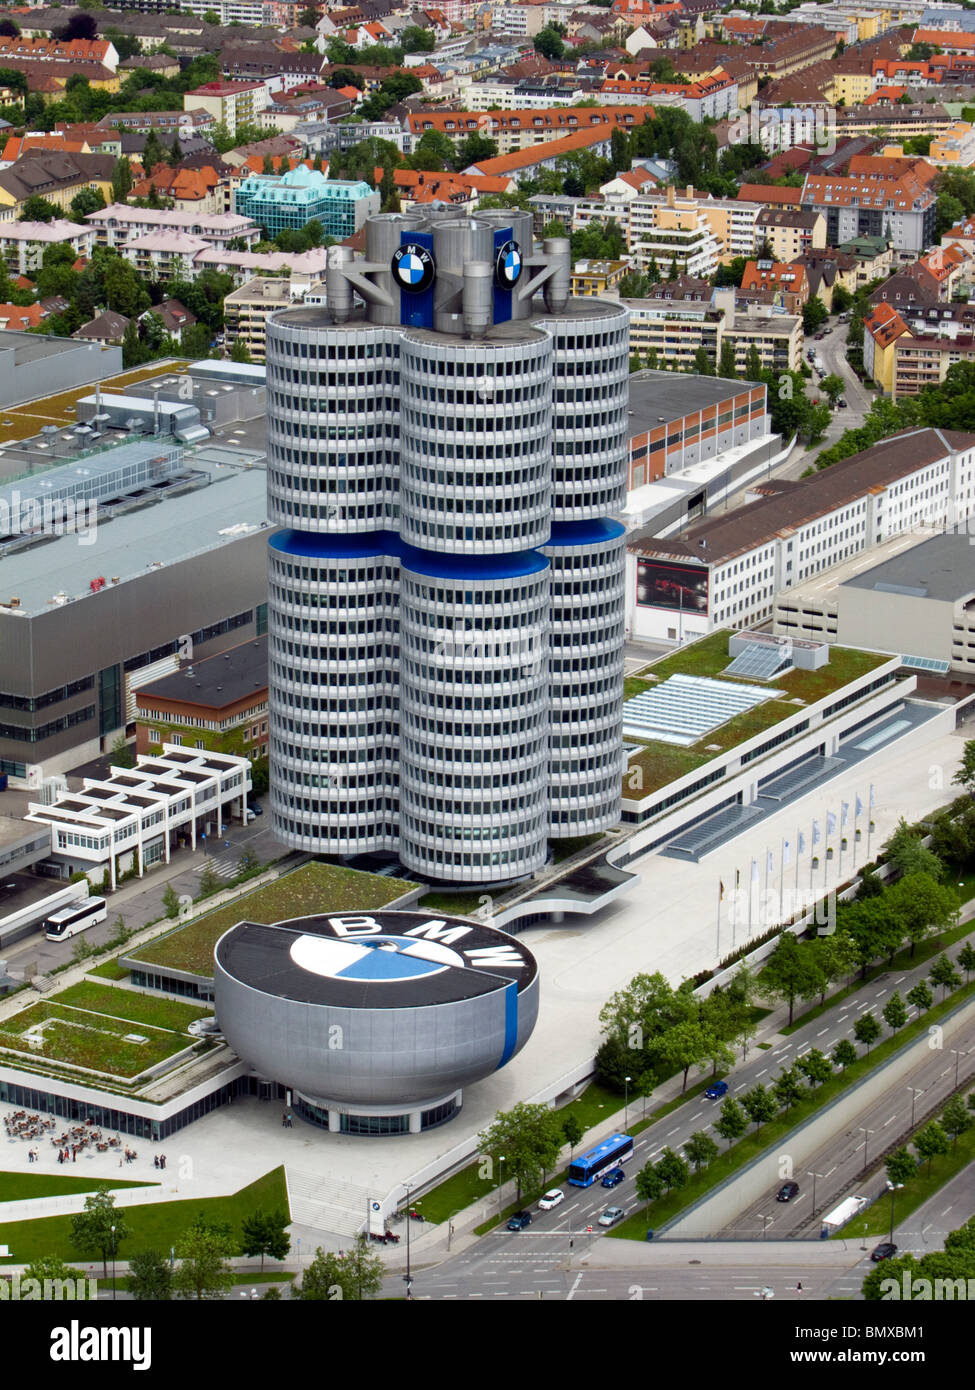 BMW factory / visitor centre / headquarters in Munich Germany. Stock Photo